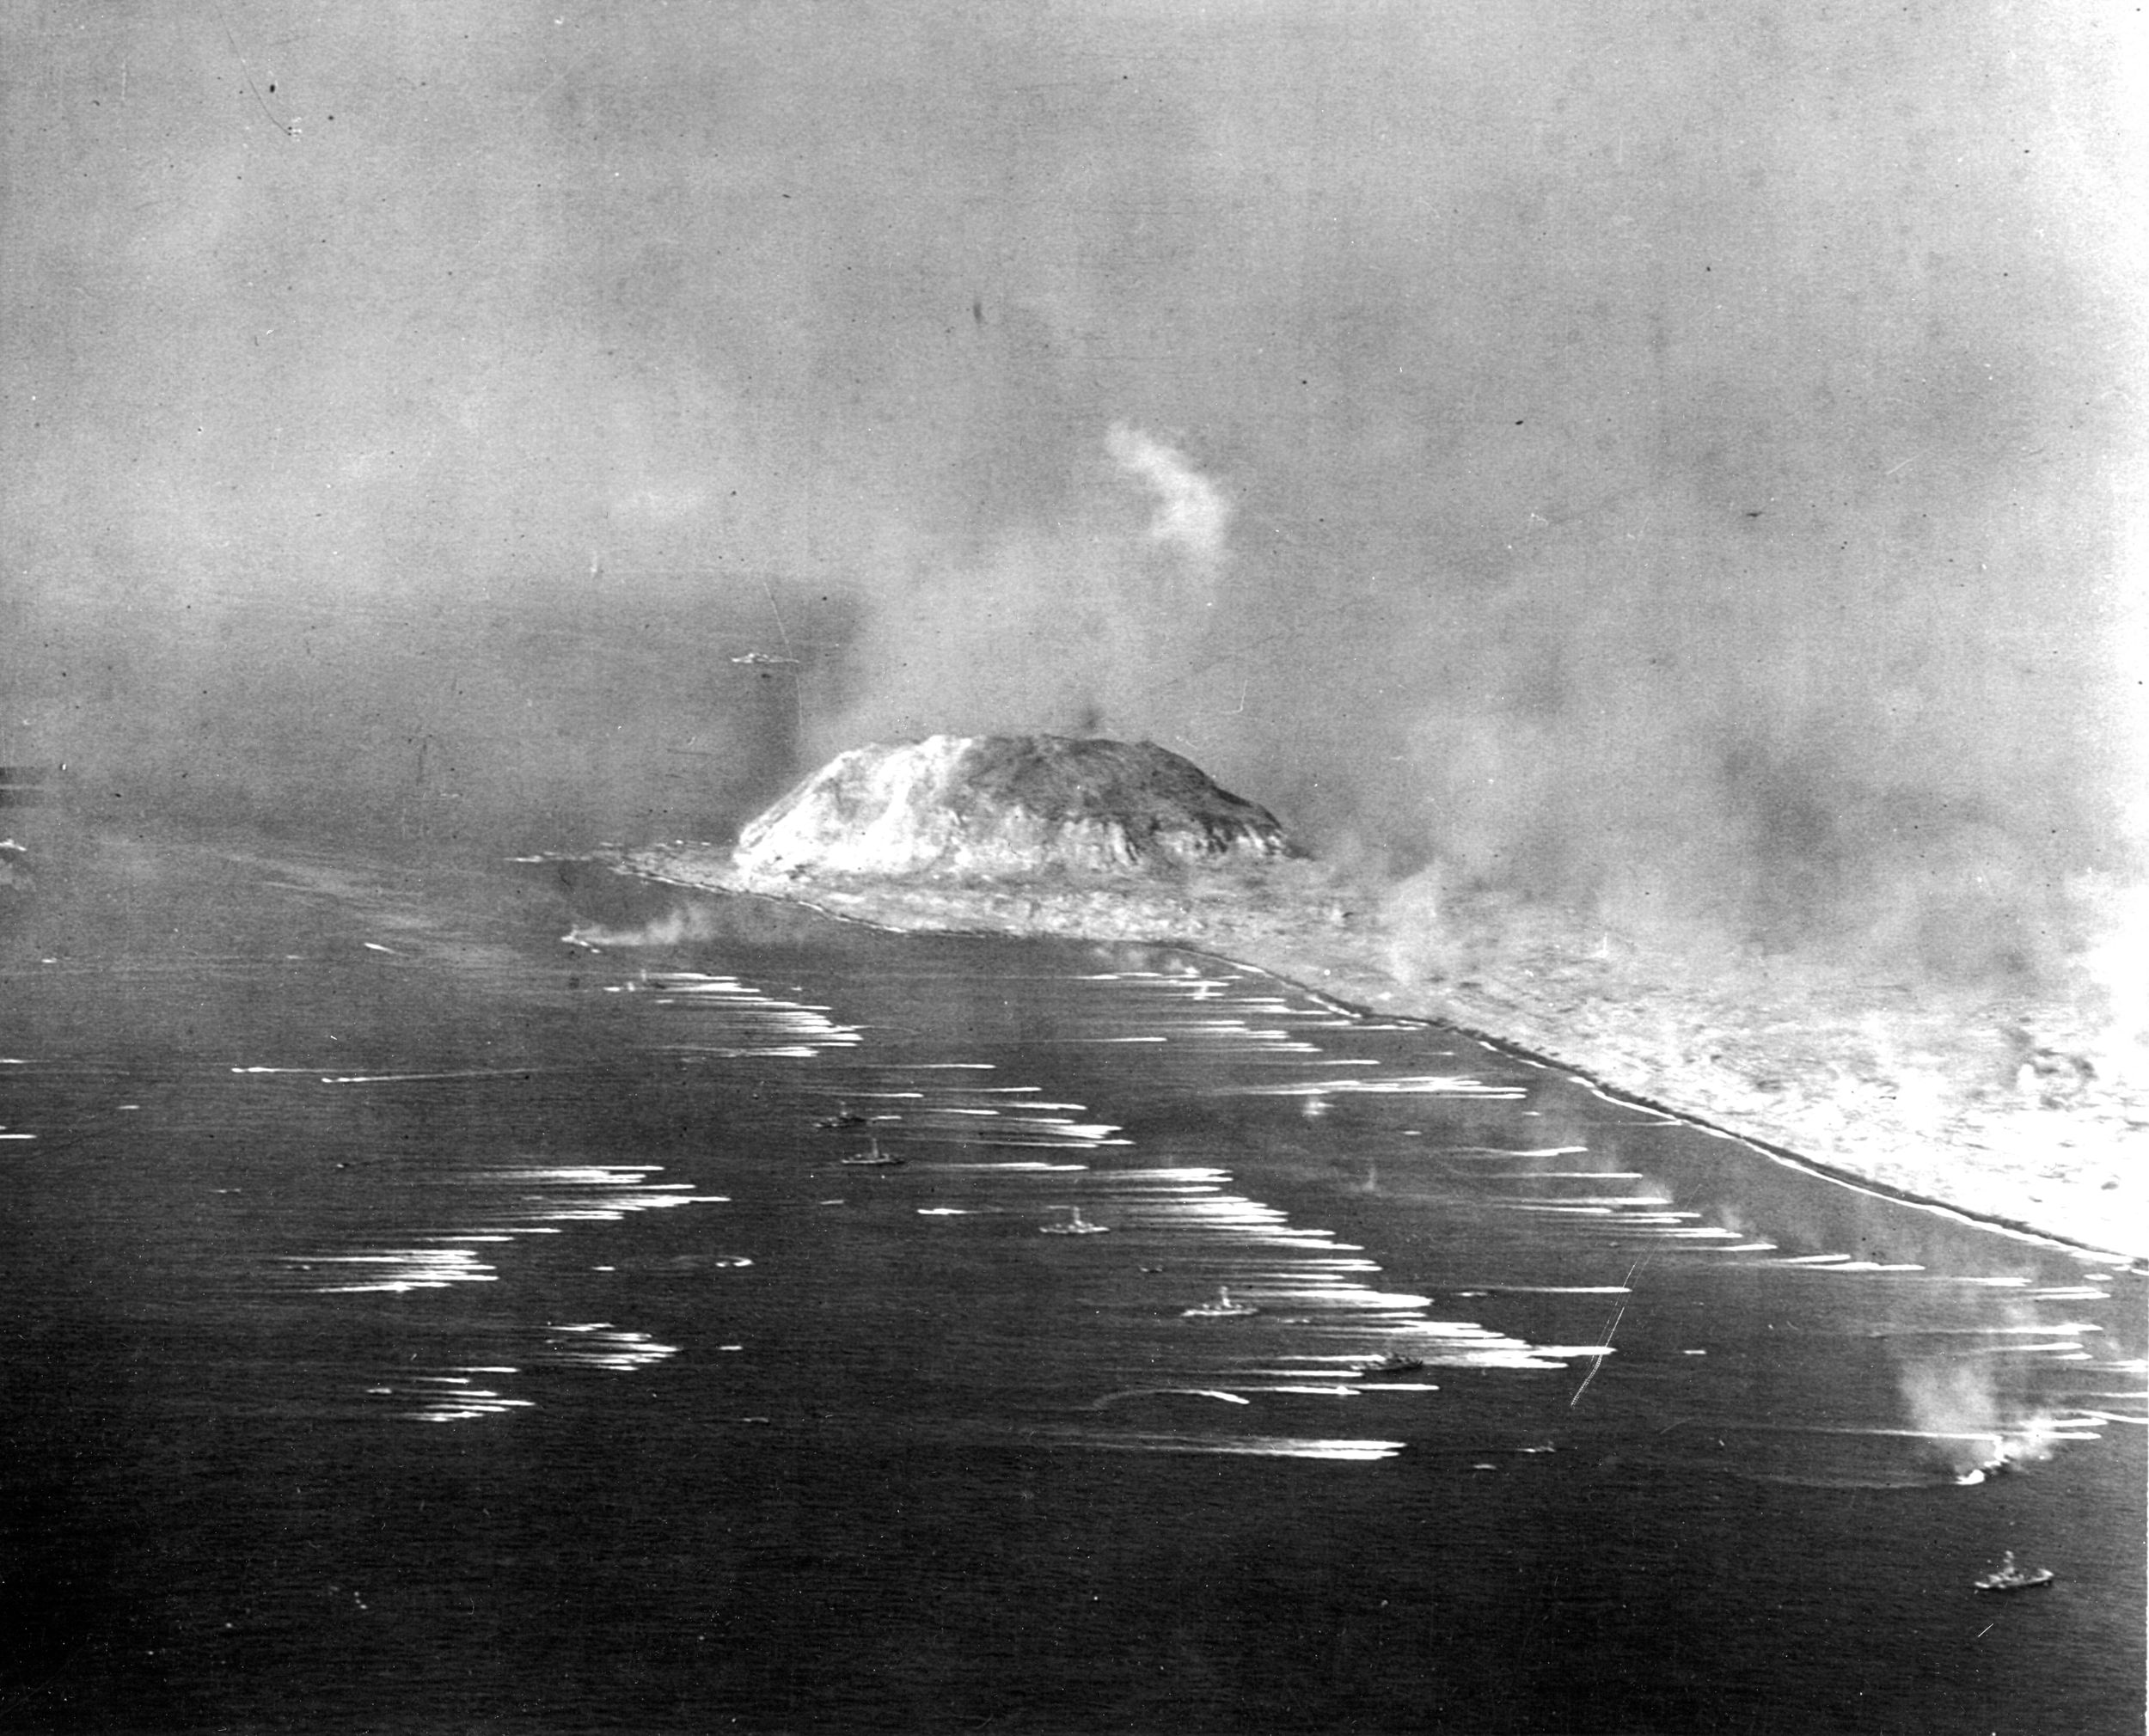 Mount Suribachi, 550 feet high, looms in the background as U.S. Marines assault the beaches of Iwo Jima on February 19, 1945. The wakes of dozens of landing craft are visible in this image.